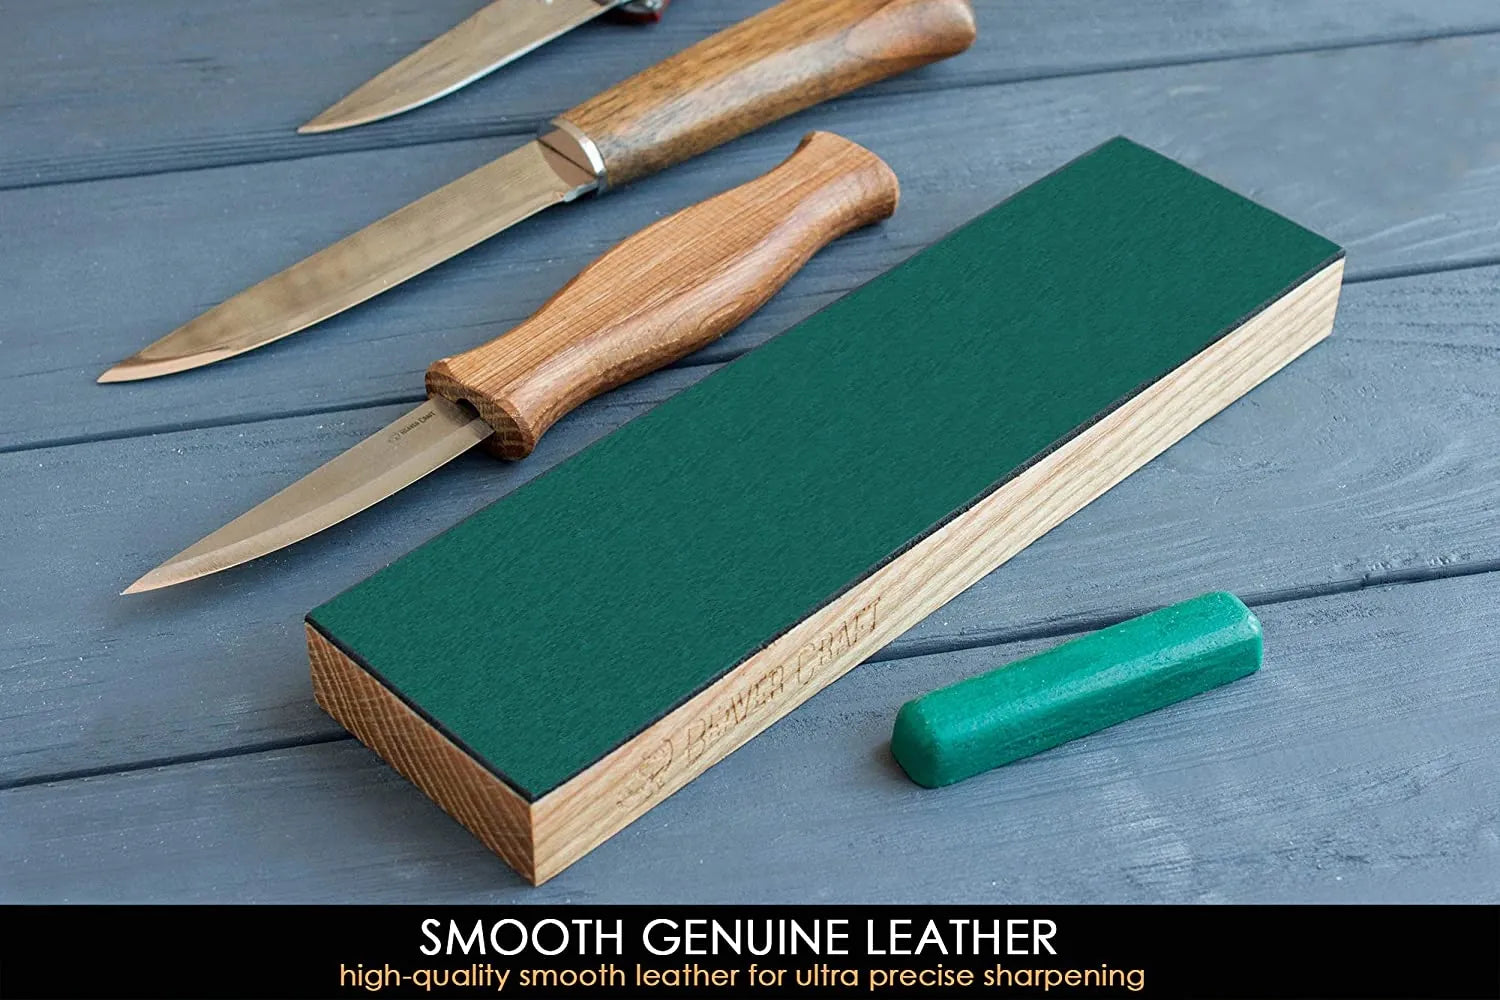 BeaverCraft LS6P1 Leather Paddle Honing Strop Kit with Sharpening Polishing Compound 14 inch x 2 inch Knife Stropping Paddle Block for Honing